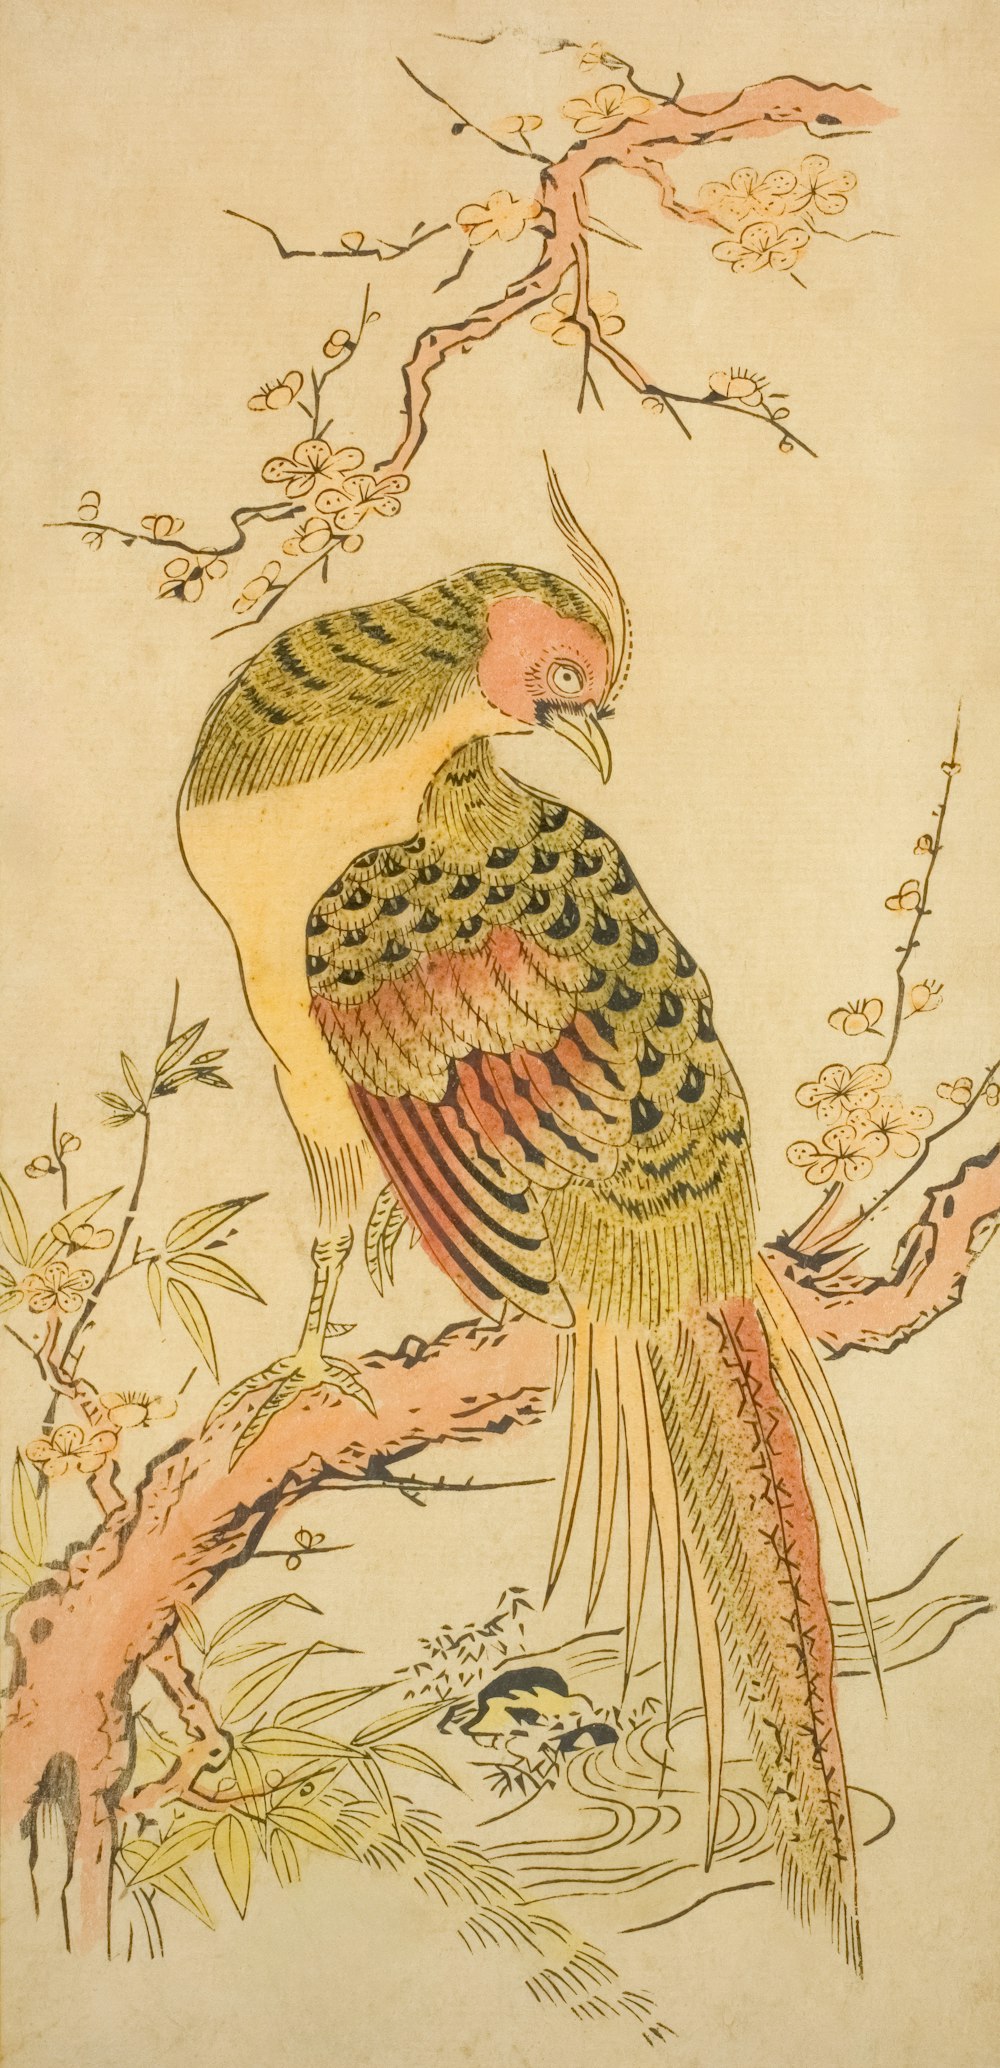 a painting of a bird sitting on a tree branch